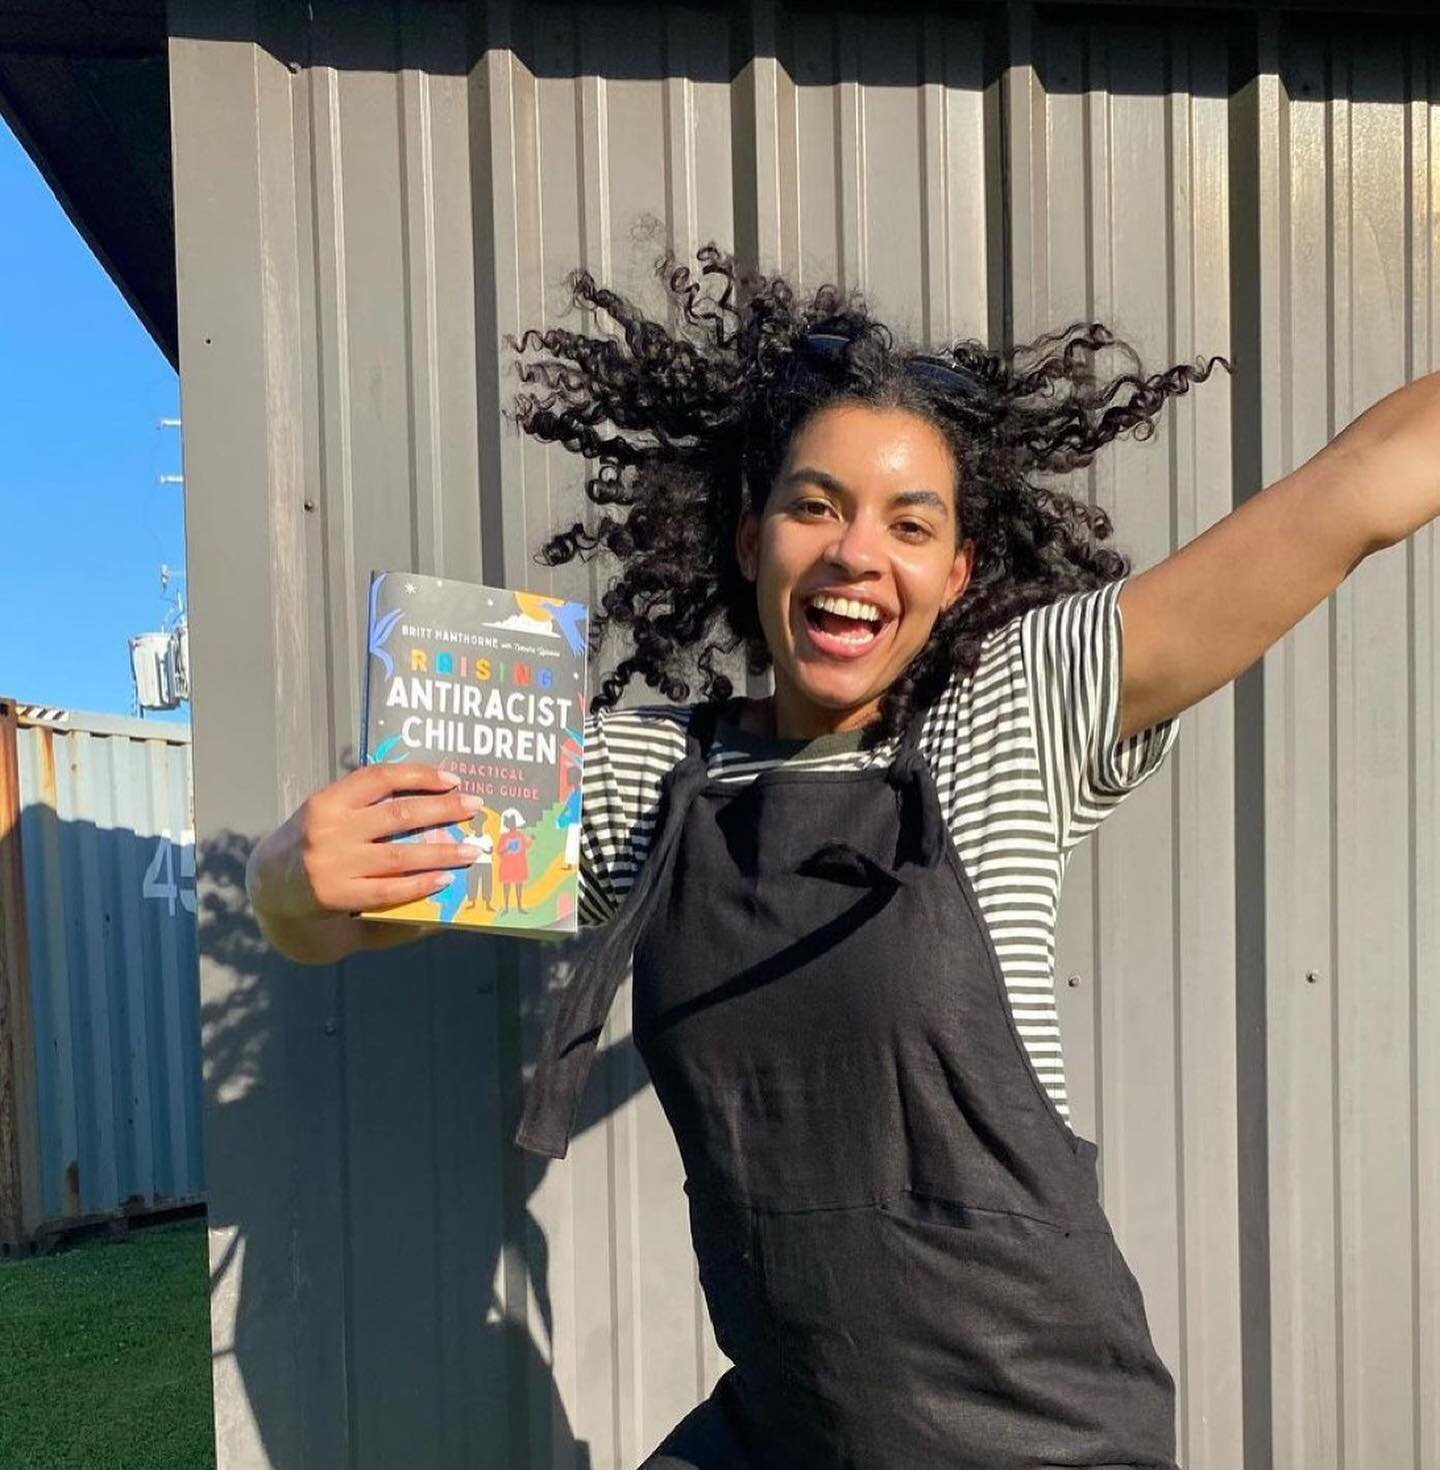 Have you purchased your copy of Raising Anti-Racist Children?  @britthawthorne is a badass co-conspirator of Indigenous Educators, Indigenous Children, our people. We are so happy for you @britthawthorne 😘❤️

Repost from @britthawthorne
&bull;
[ID: 